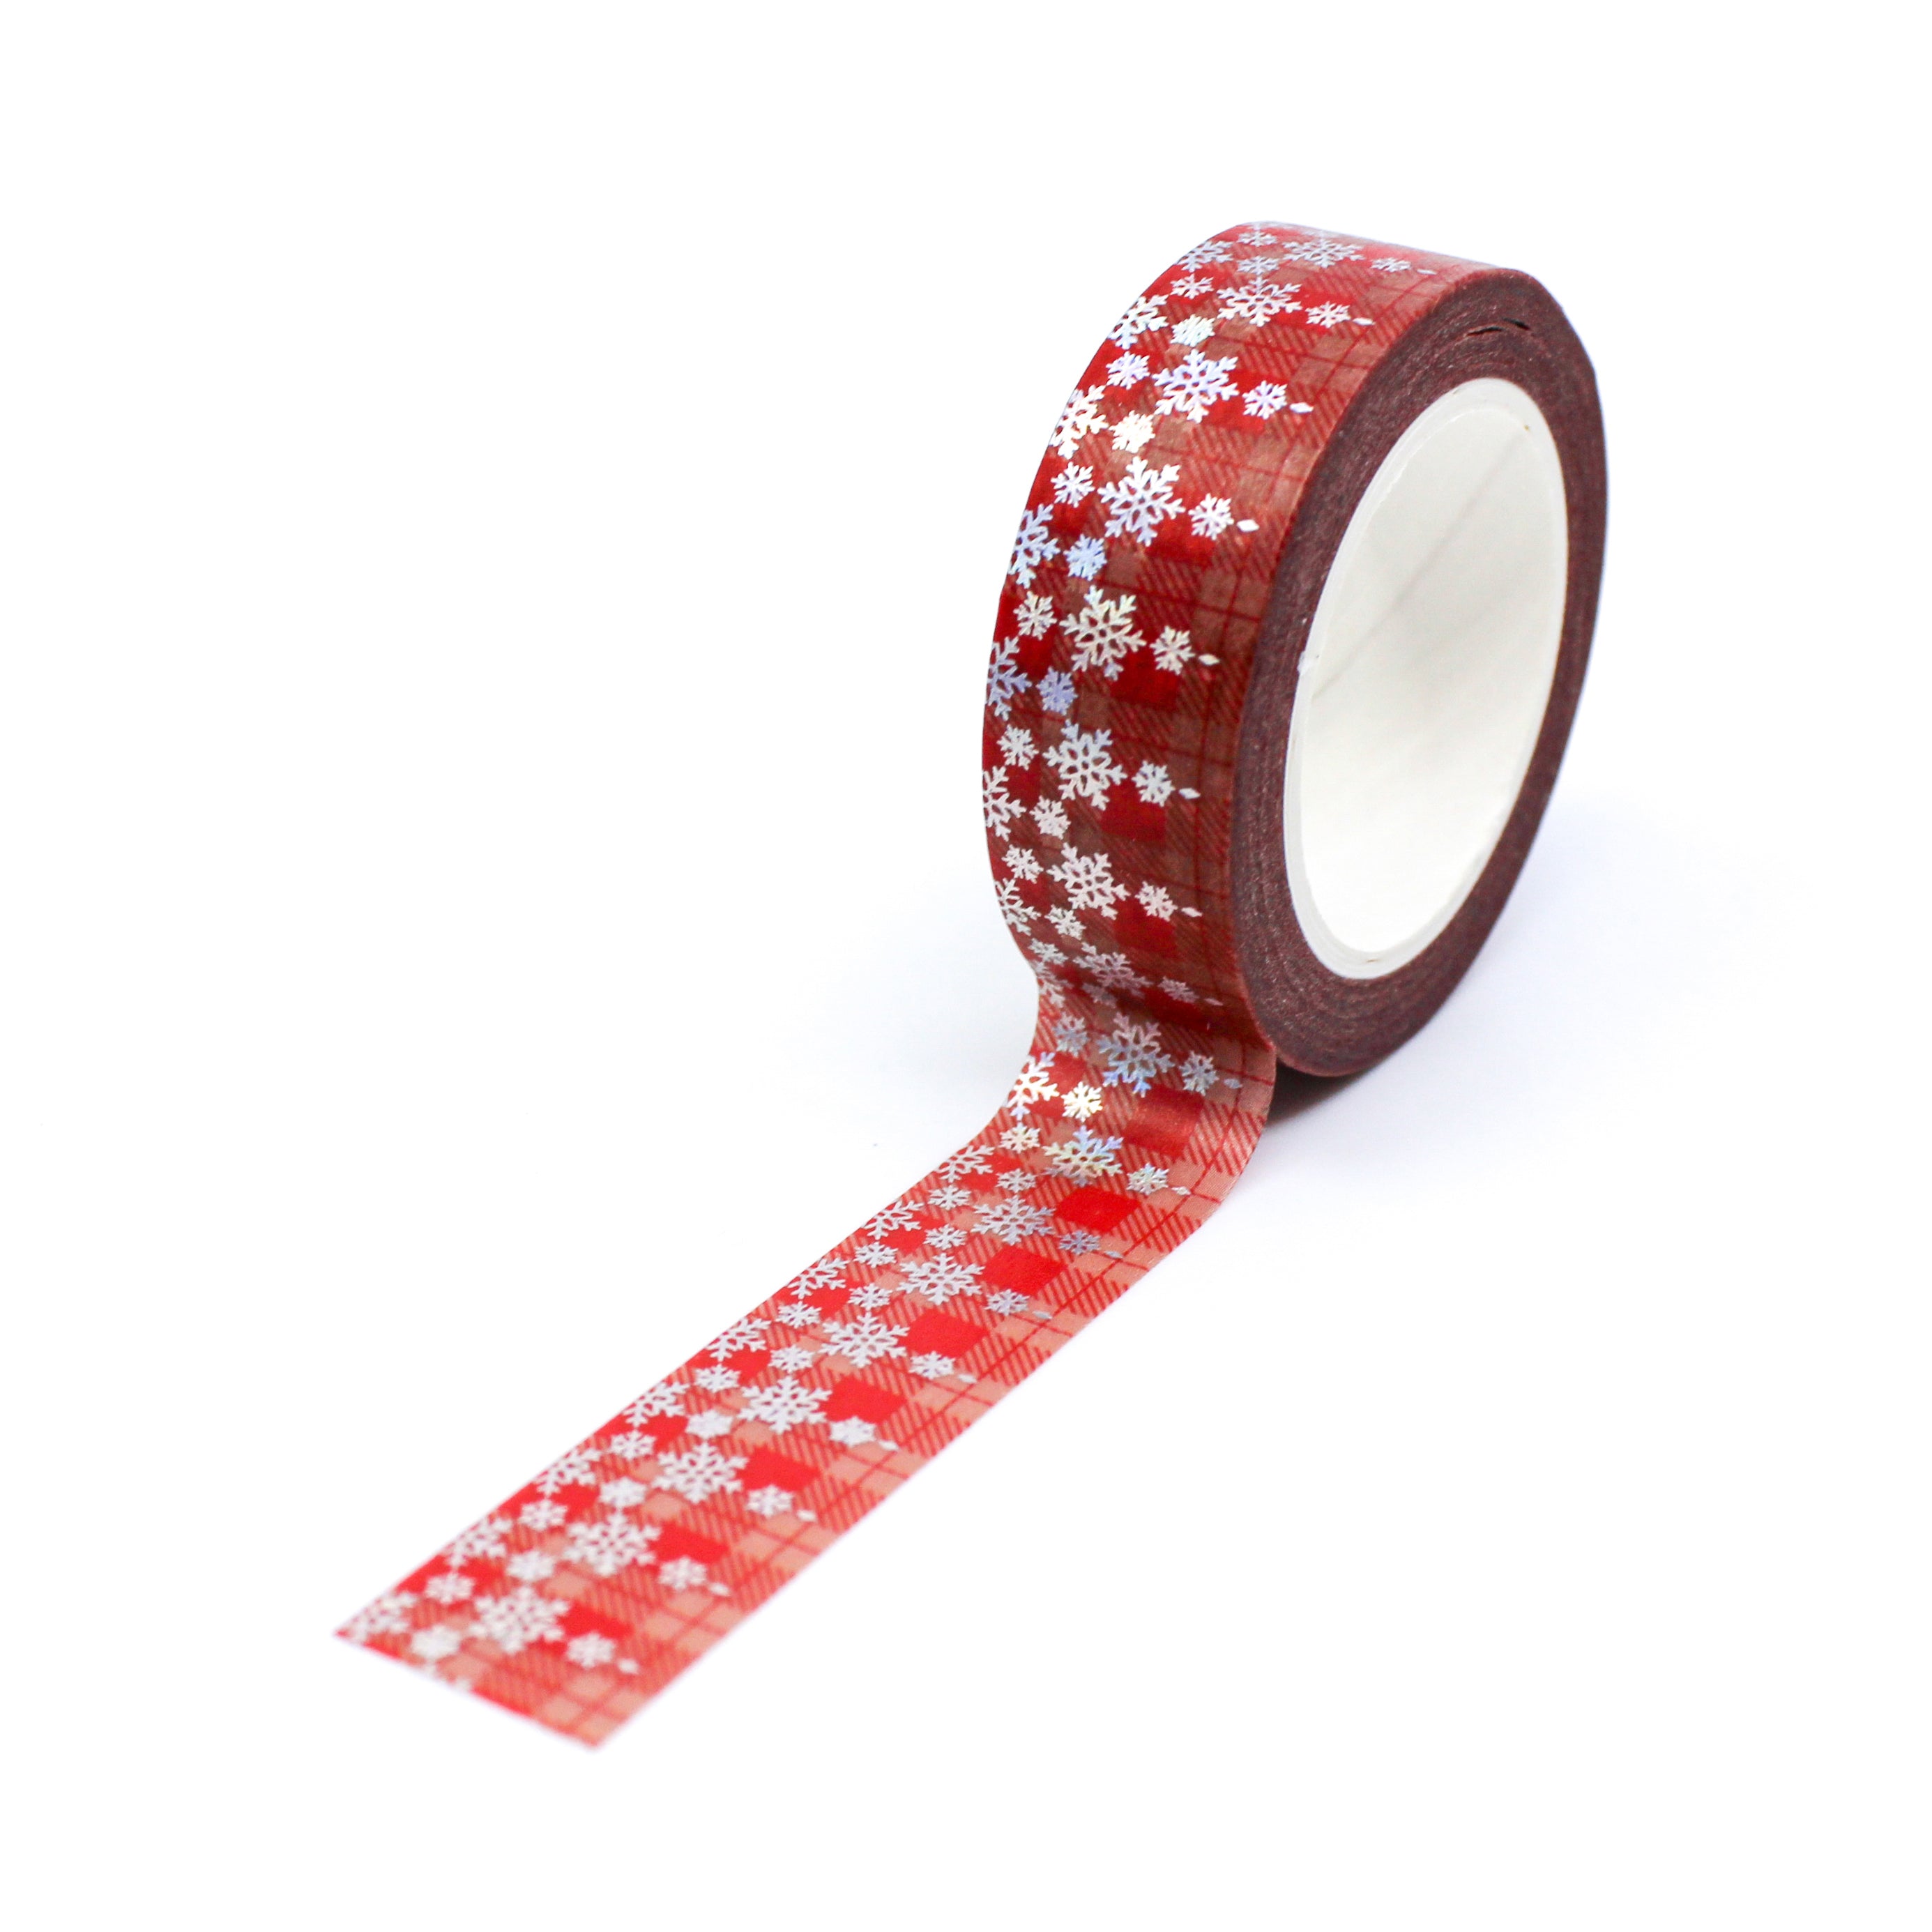 This is a beautiful silver foil snowflake pattern washi tape on a traditional Holiday red plaid  Background from BBB Supplies Craft Shop